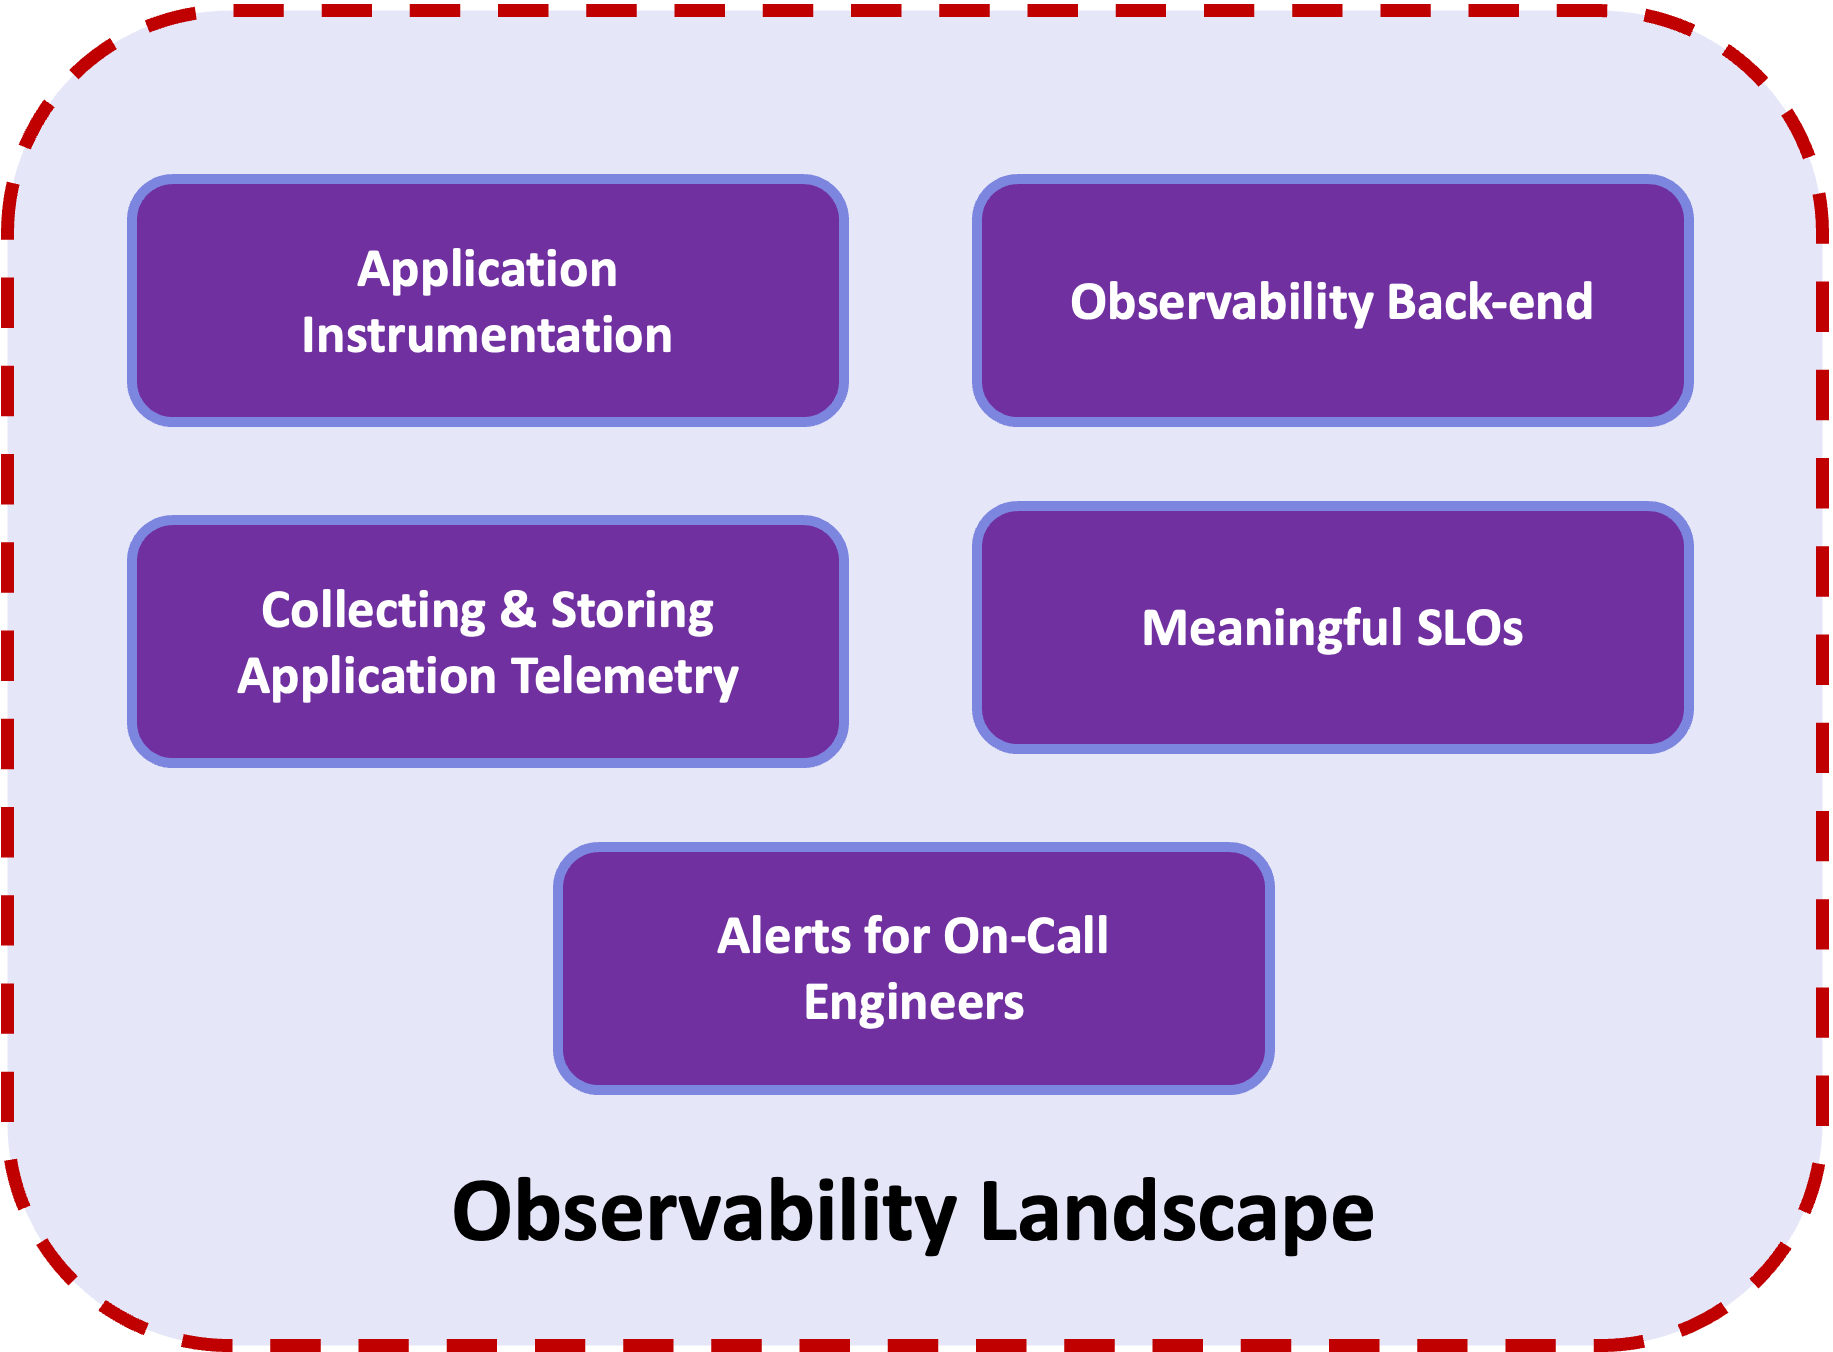 The Observability landscape is made up of Collecting and storing application telemetry, An Observability back-end, A set of meaningful SLOs, Alerts for on-call Engineers